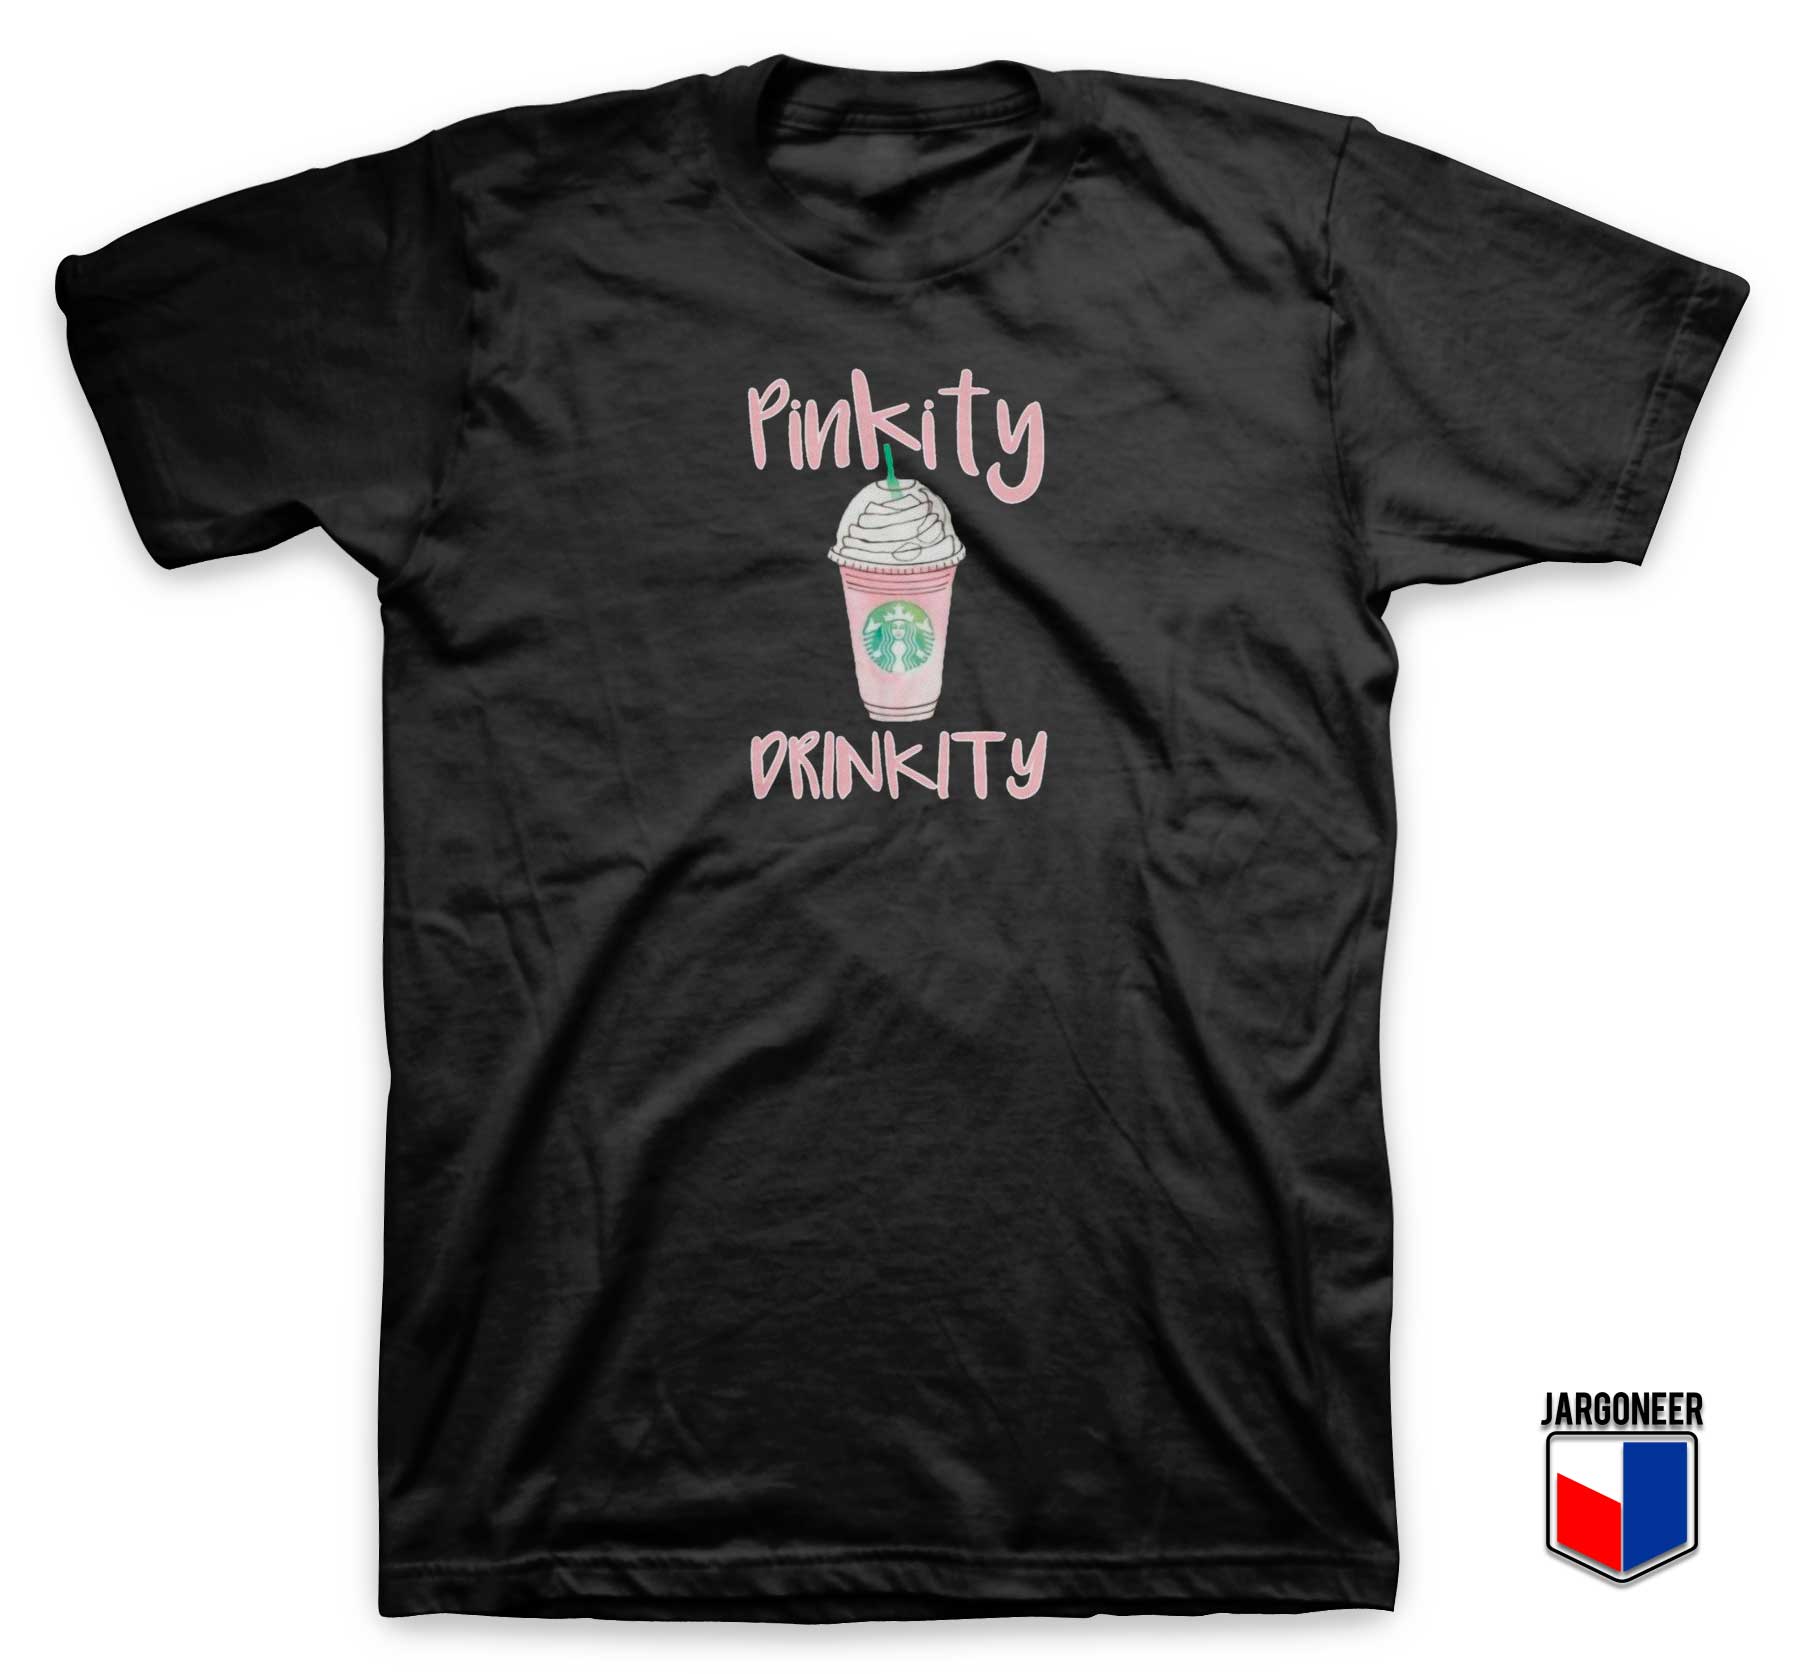 James Charles Pinkity Drinkity T Shirt - Shop Unique Graphic Cool Shirt Designs